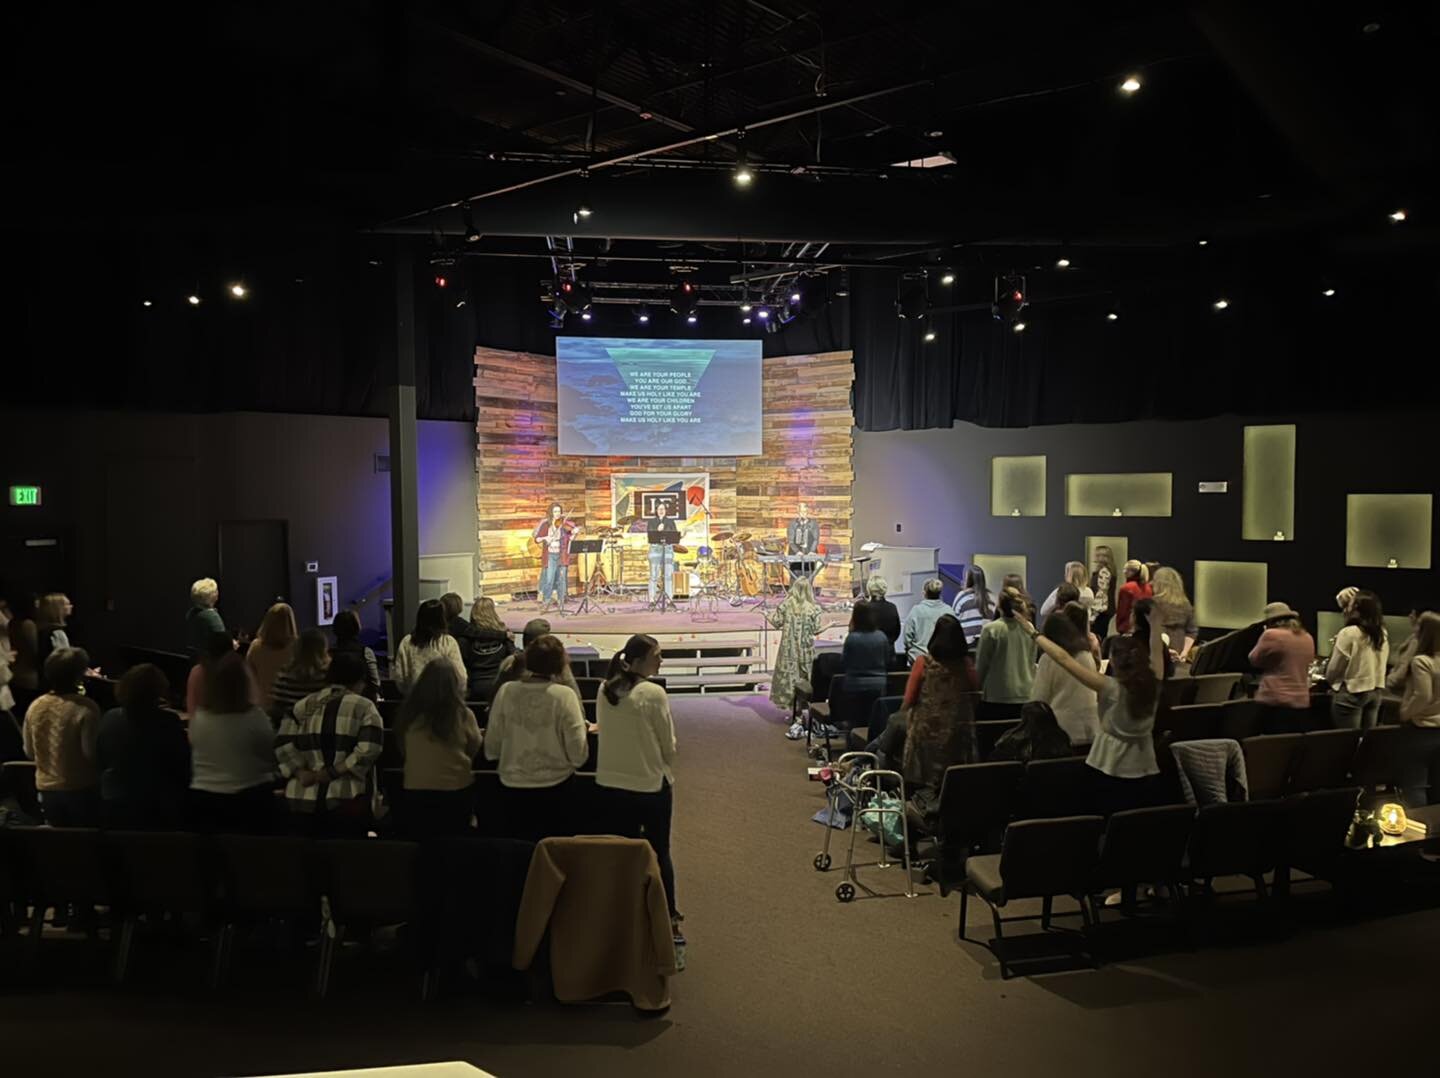 Hallelujah! Worshiping with the women of our town tonight. Join with us in celebration over the woman who RAN to the front to meet Jesus! 
&ldquo;If you&rsquo;re calling, we&rsquo;re running. We&rsquo;re not walking, we&rsquo;re running. God we need 